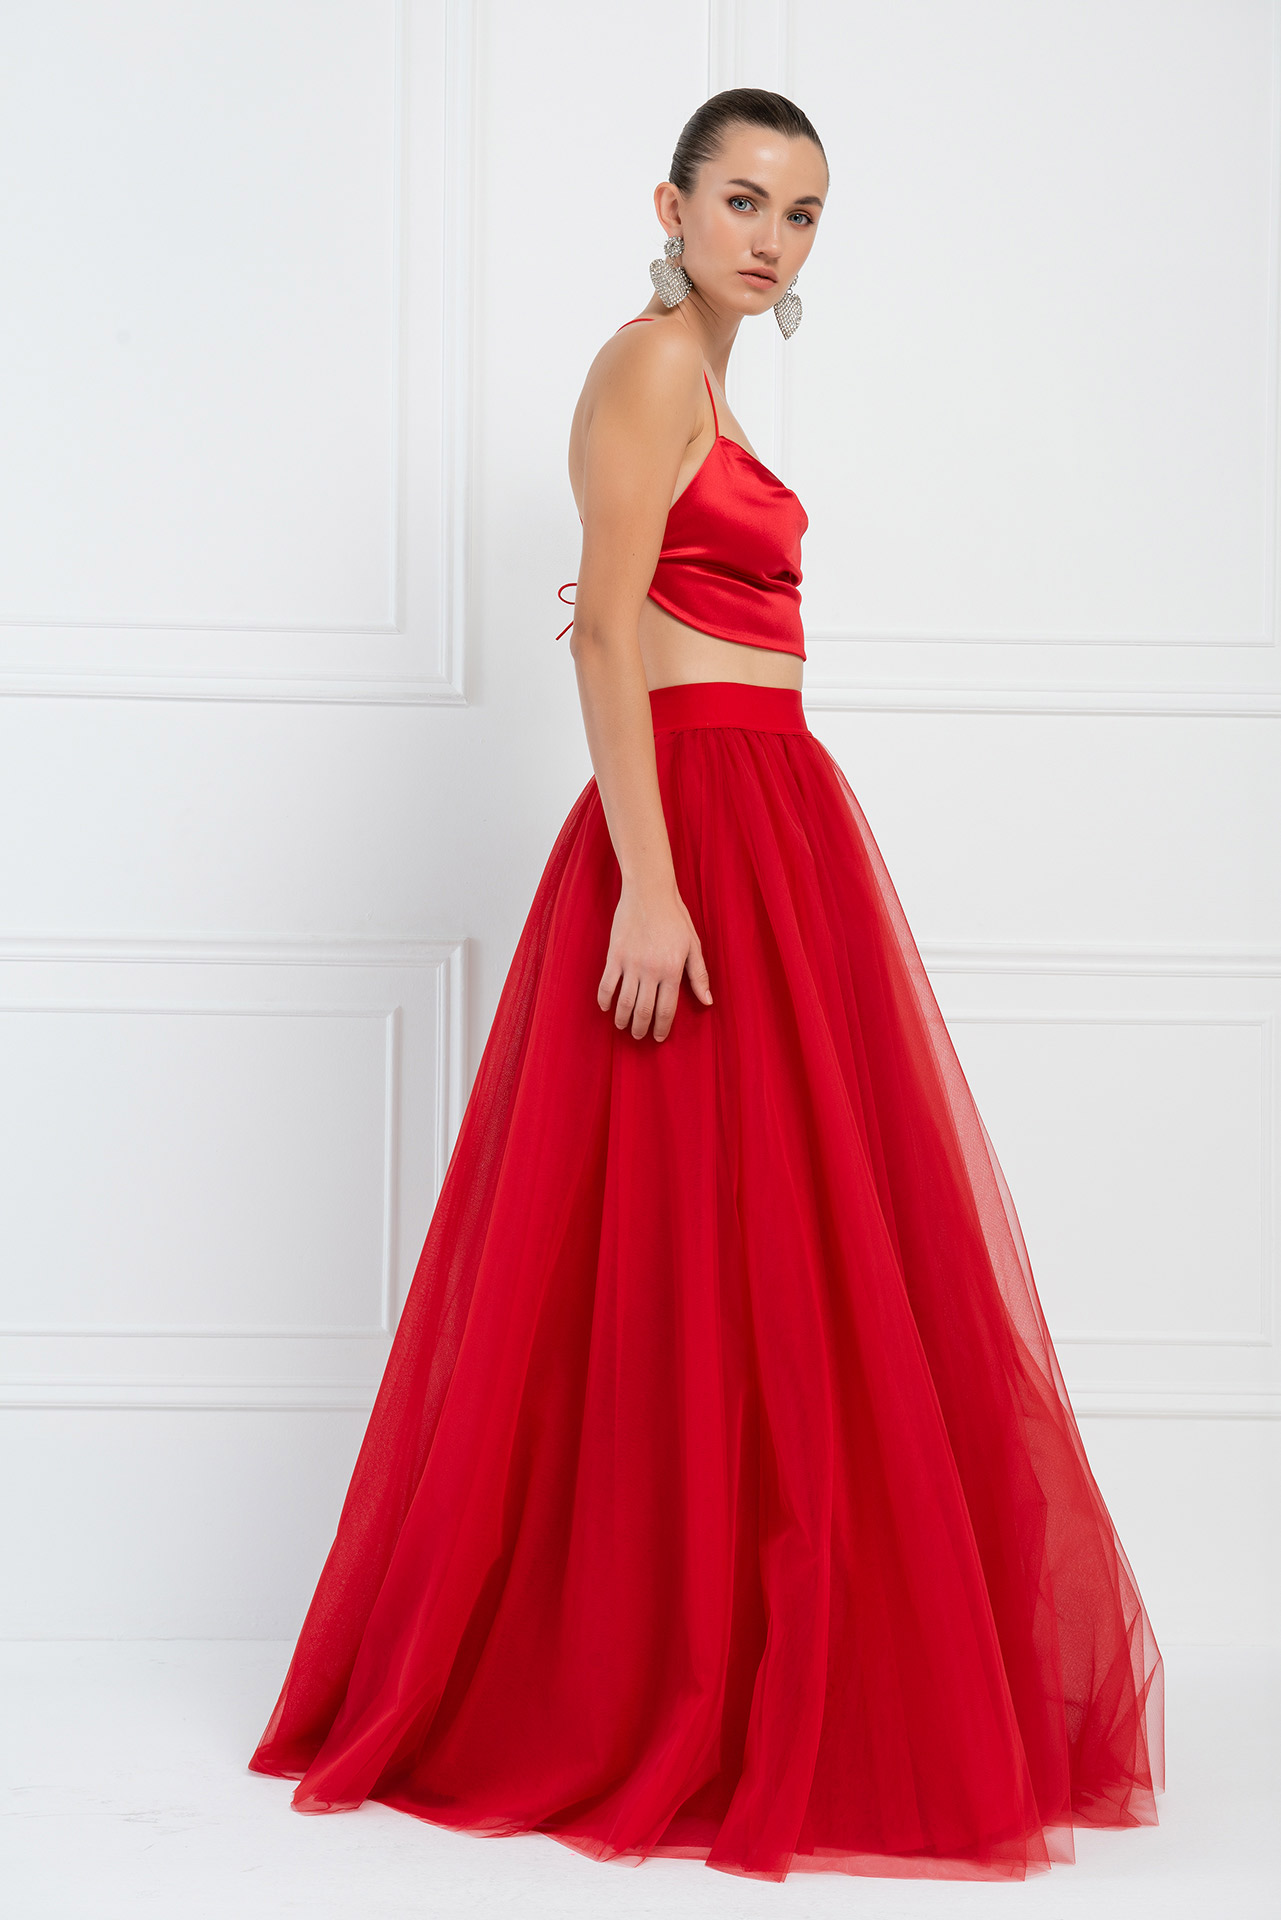 Wholesale Red Tulle Maxi Skirt